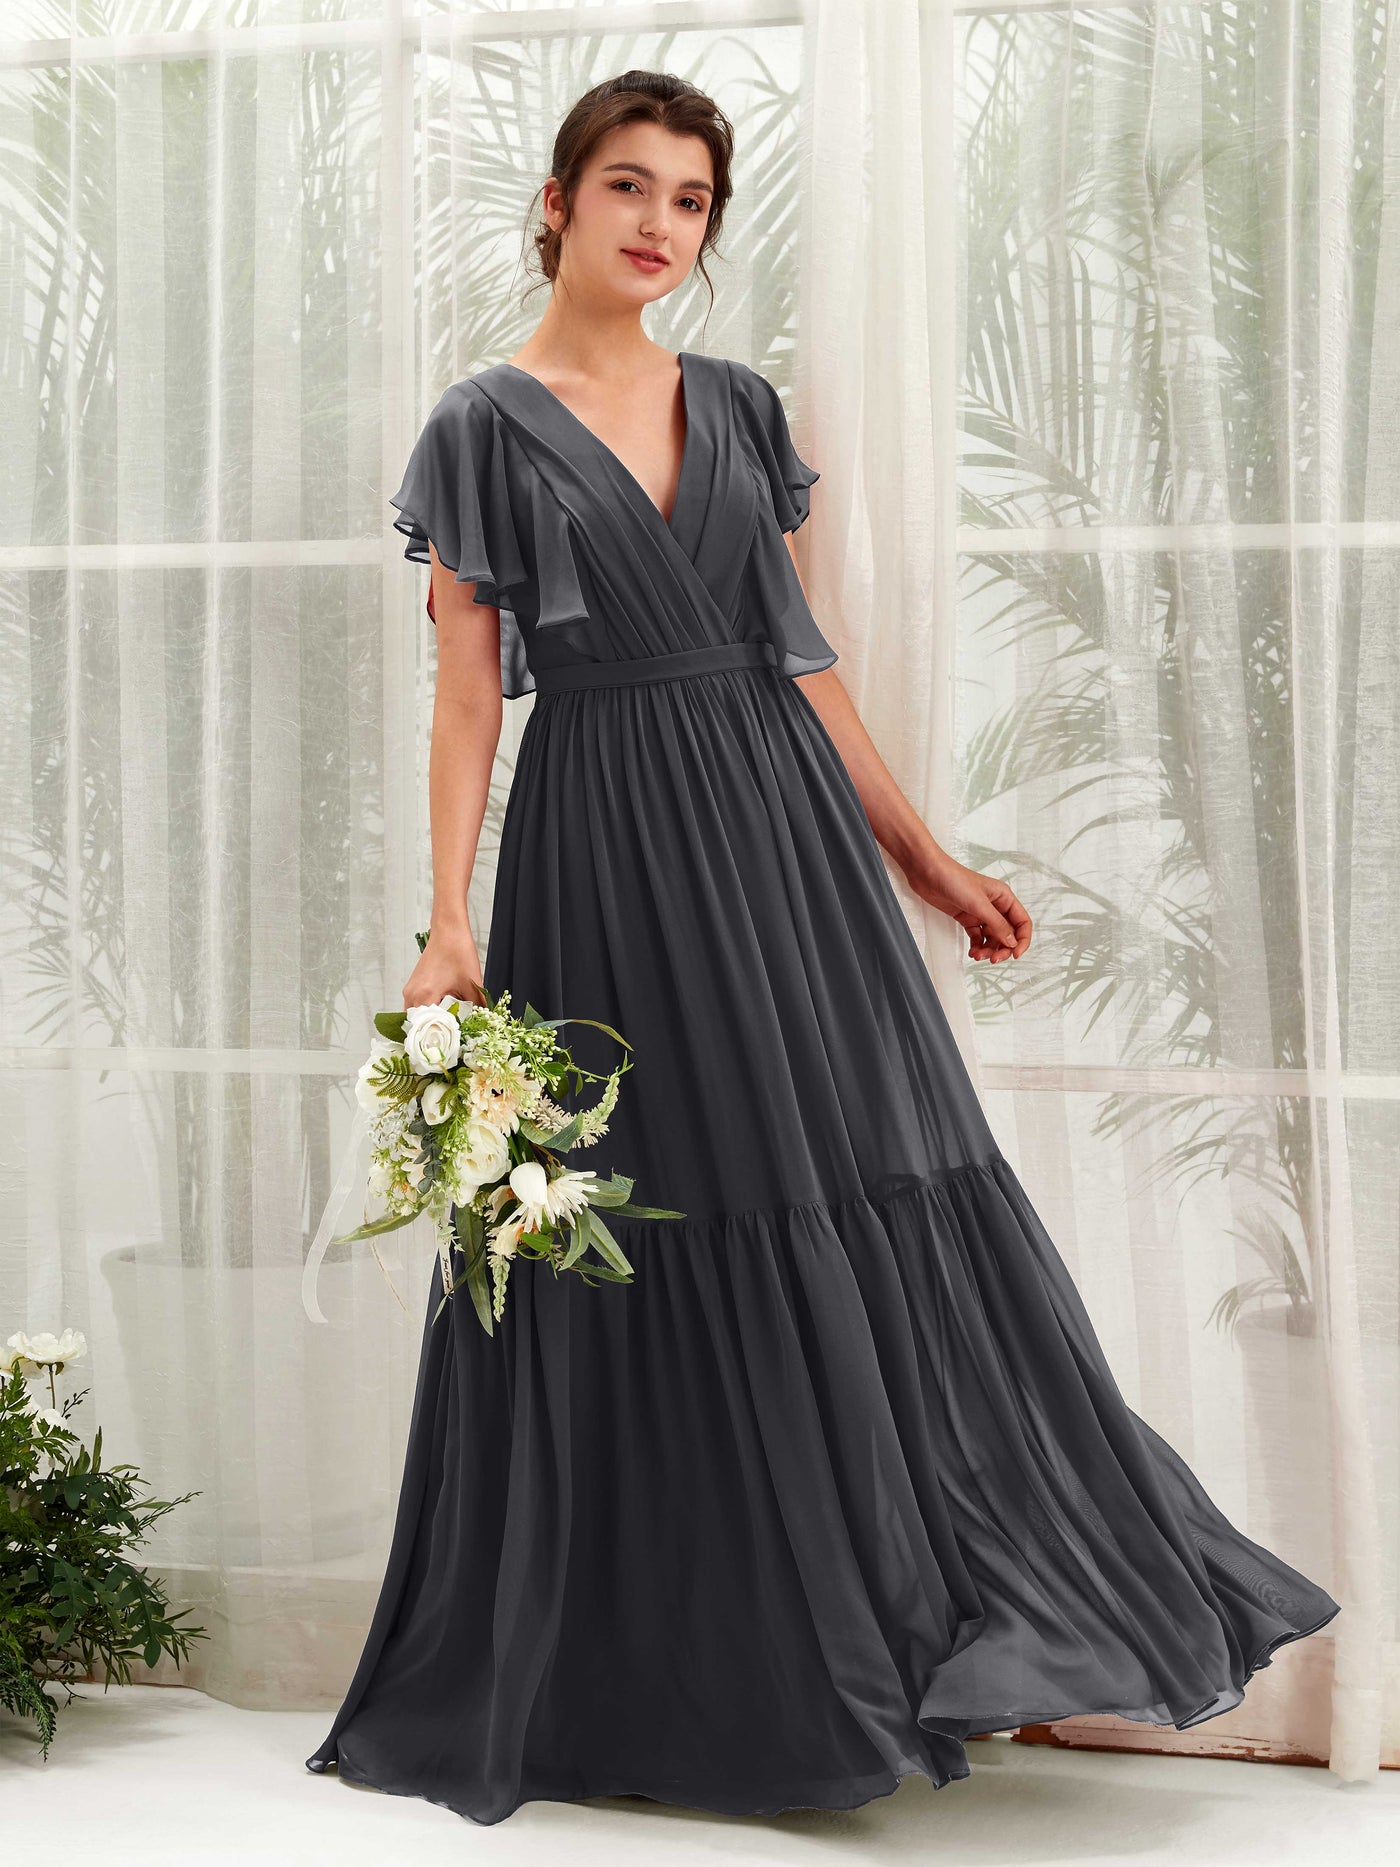 Pewter Bridesmaid Dresses Bridesmaid Dress A-line Chiffon V-neck Full Length Short Sleeves Wedding Party Dress (81225938)#color_pewter